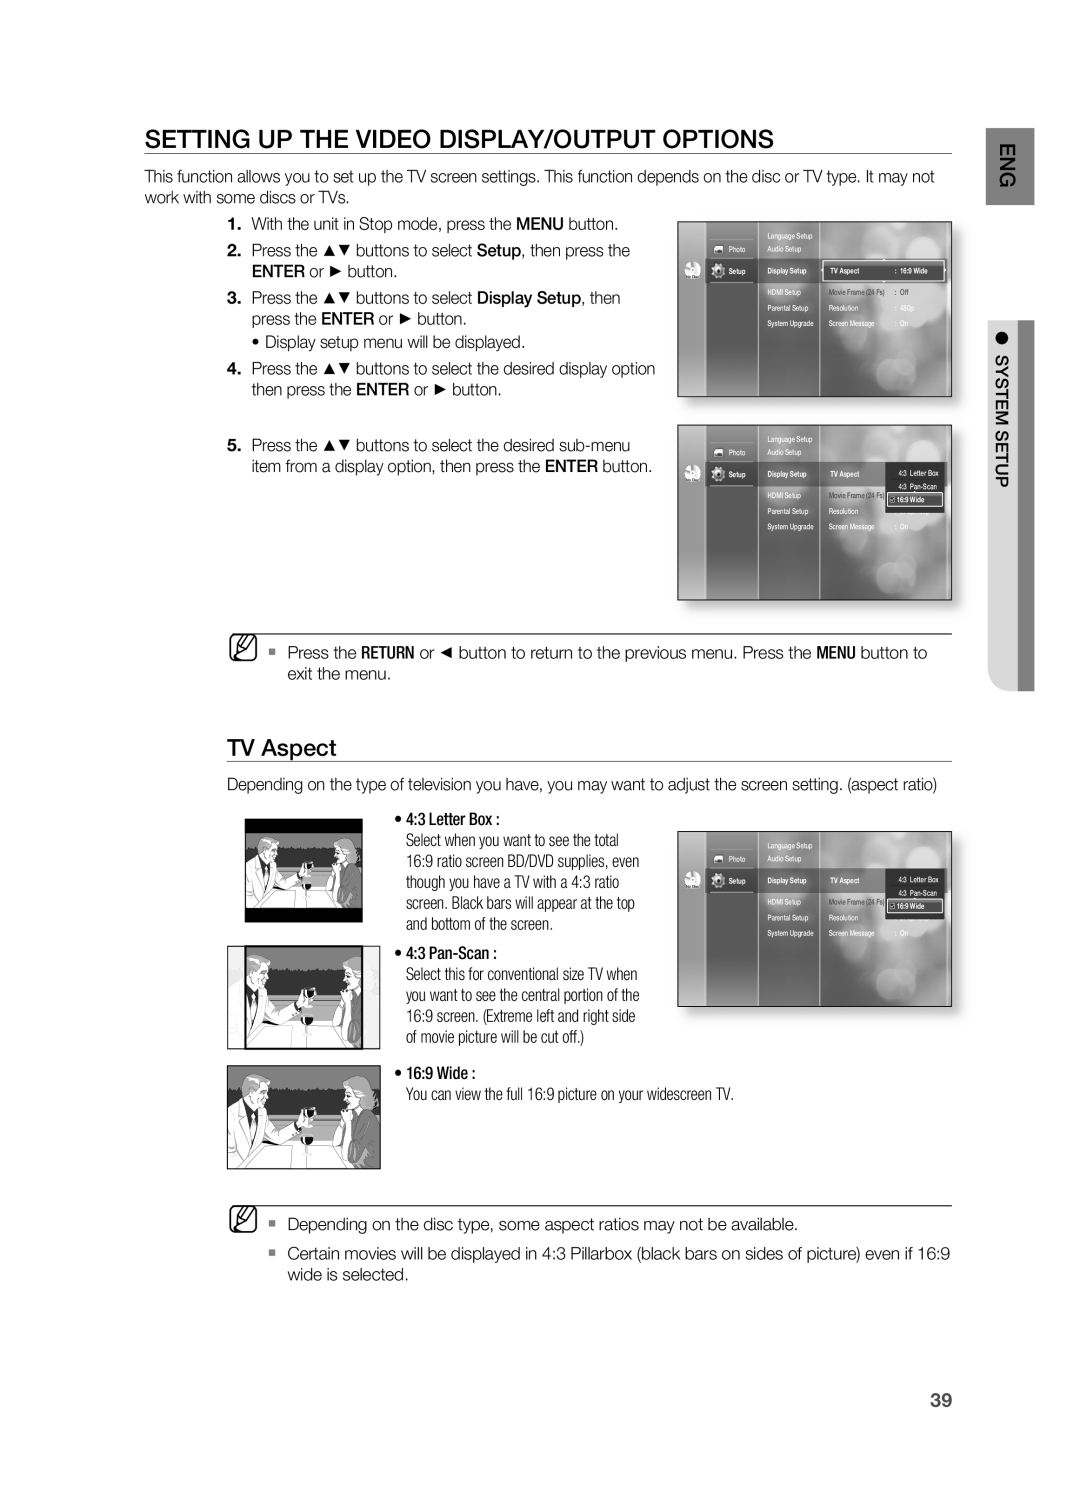 Samsung HT-BD2S manual SETTIng UP THE VIDEO DISPLAY/OUTPUT OPTIOnS, TV Aspect 